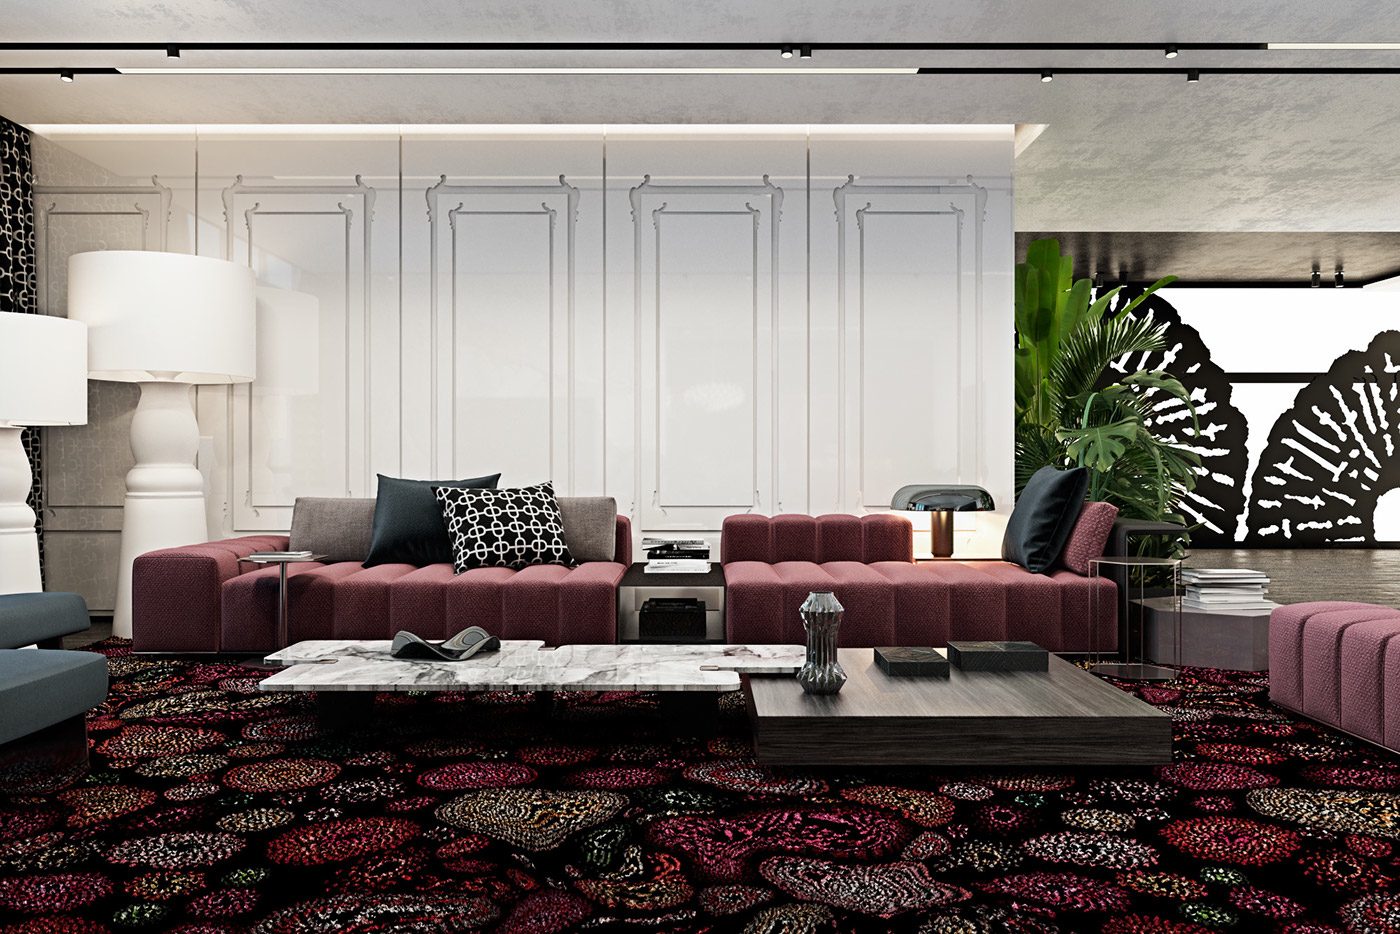 Red living room ideas "width =" 1400 "height =" 934 "srcset =" https://mileray.com/wp-content/uploads/2016/07/wine-black-and-white-interior-color-palette. jpg 1400w, https://mileray.com/wp-content/uploads/2016/07/wine-black-and-white-interior-color-palette-300x200.jpg 300w, https://mileray.com/wp- content / uploads / 2016/07 / wine-black-and-white-interior-color-palette-768x512.jpg 768w, https://mileray.com/wp-content/uploads/2016/07/wine-black-and -white-interior-color-palette-1024x683.jpg 1024w, https://mileray.com/wp-content/uploads/2016/07/wine-black-and-white-interior-color-palette-696x464.jpg 696w , https://mileray.com/wp-content/uploads/2016/07/wine-black-and-white-interior-color-palette-1068x713.jpg 1068w, https://mileray.com/wp-content/ Uploads / 2016/07 / Wine-Black-White-Interior-Color-Palette-630x420.jpg 630w "Sizes =" (maximum width: 1400px) 100vw, 1400px